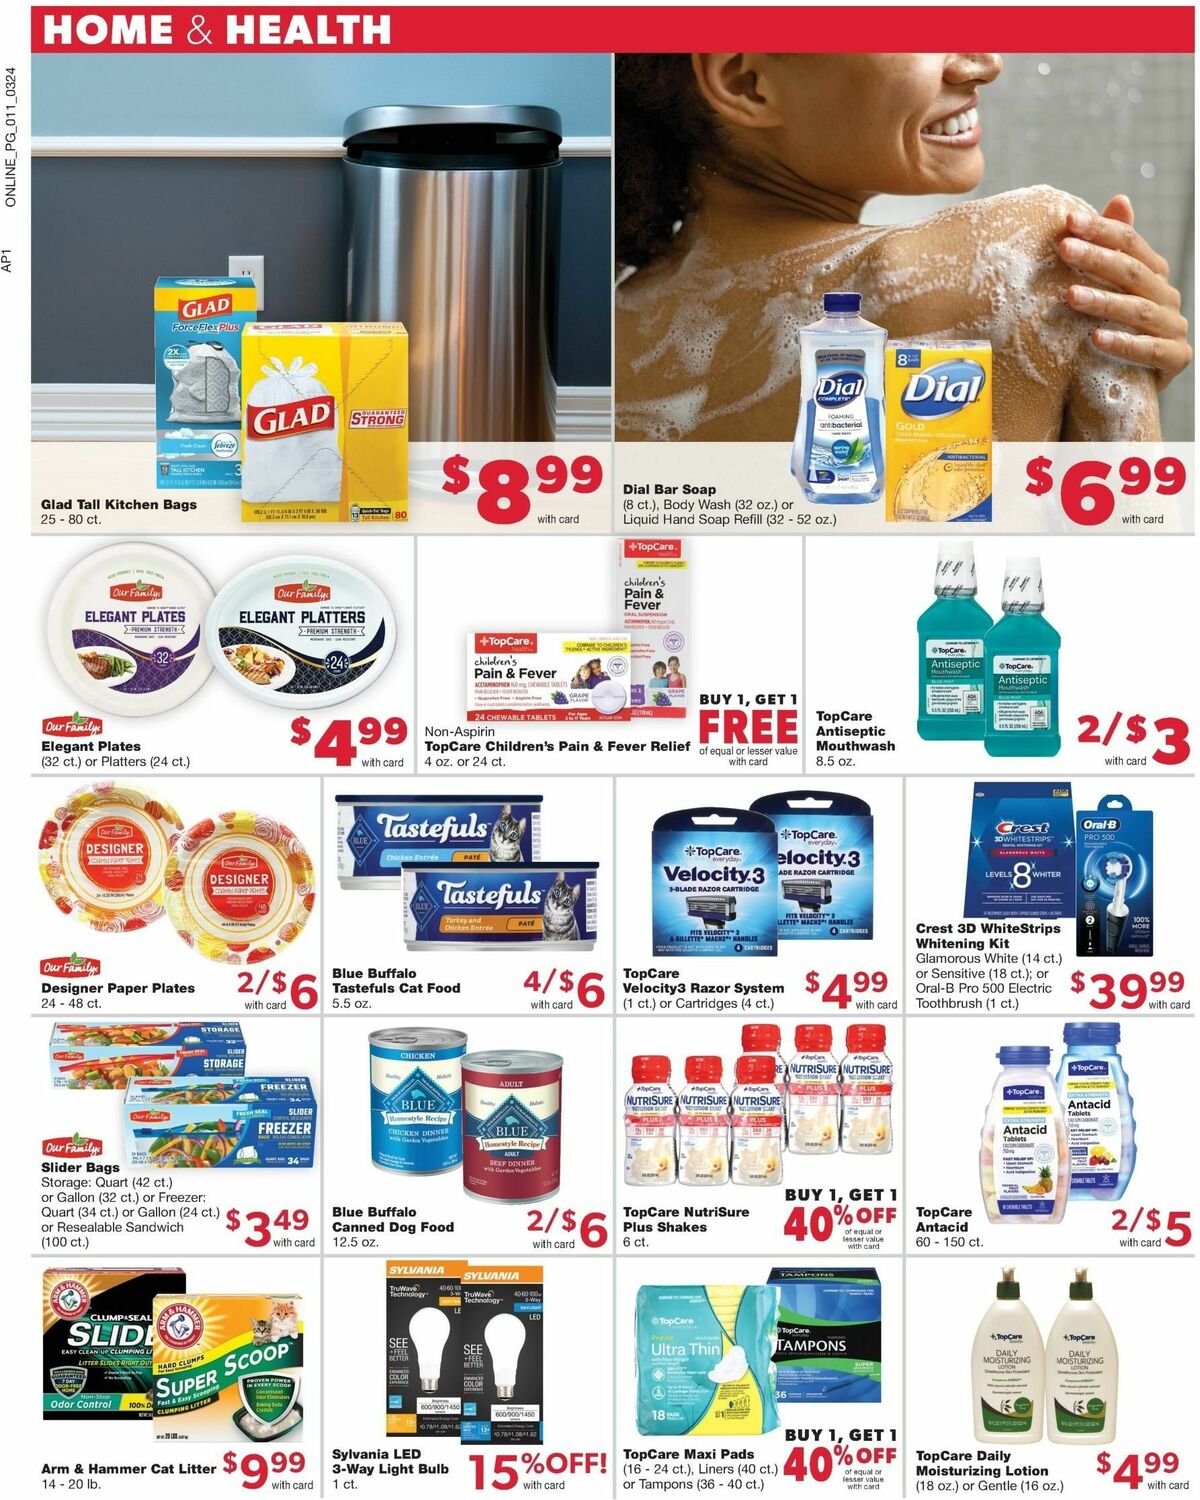 Family Fare Weekly Ad from March 25